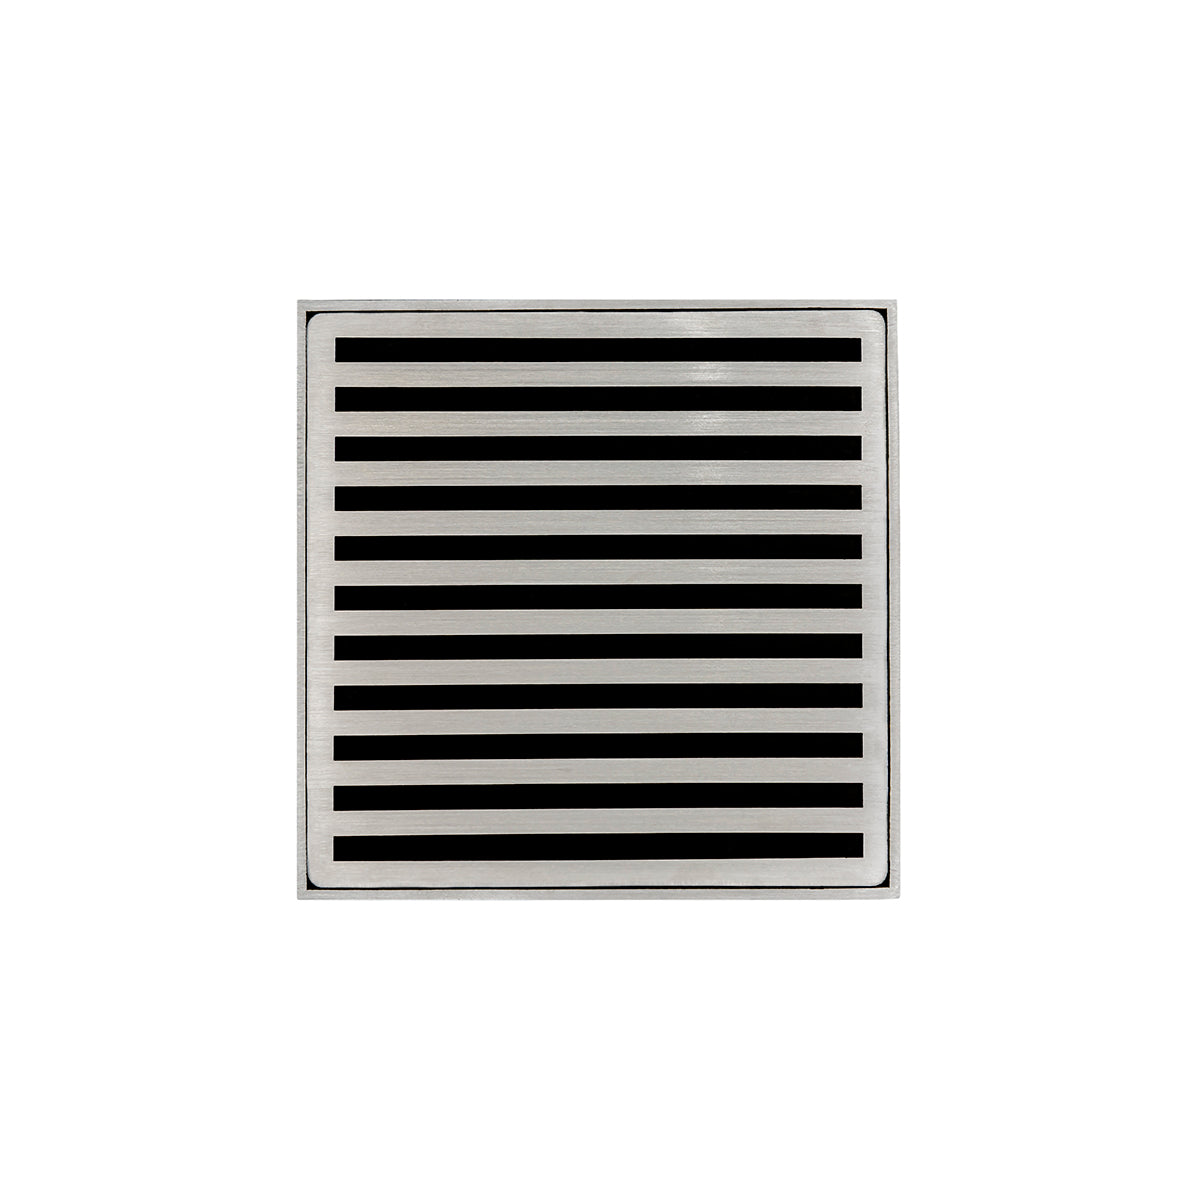 Infinity Drain 5" x 5" ND 5 Premium Center Drain Kit with Lines Pattern Decorative Plate with PVC Drain Body, 2" Outlet